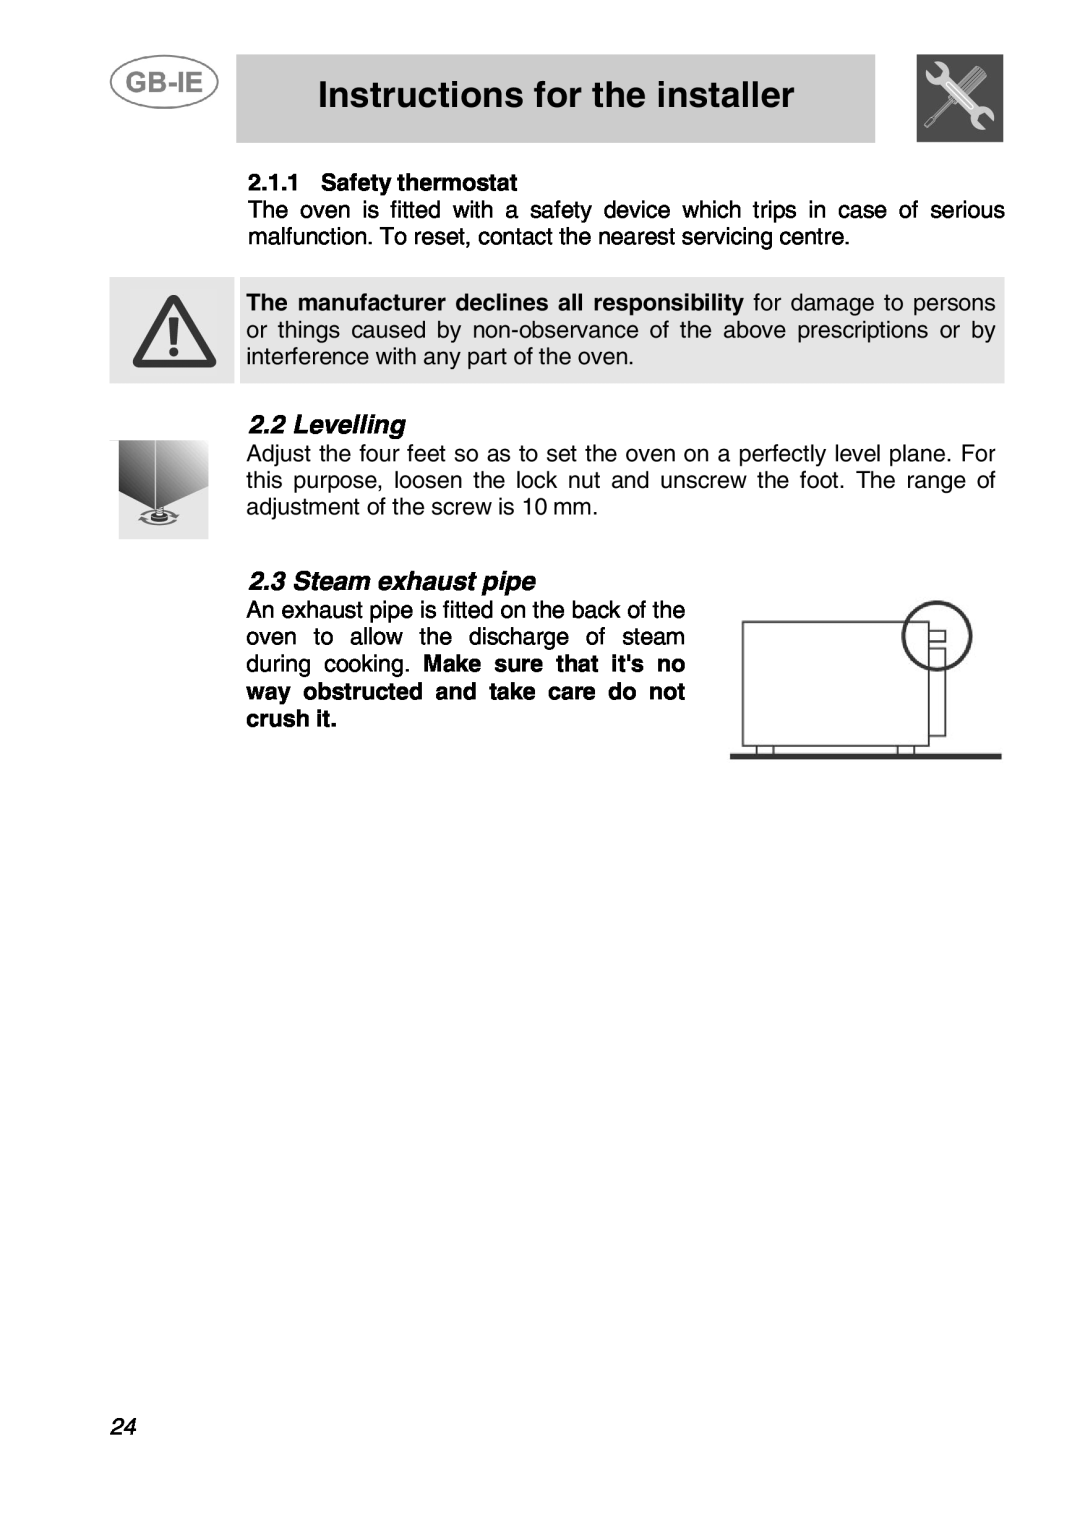 Smeg ALFA135X1, ALFA135XV, ALFA135XB manual Levelling, Steam exhaust pipe, Safety thermostat, Instructions for the installer 